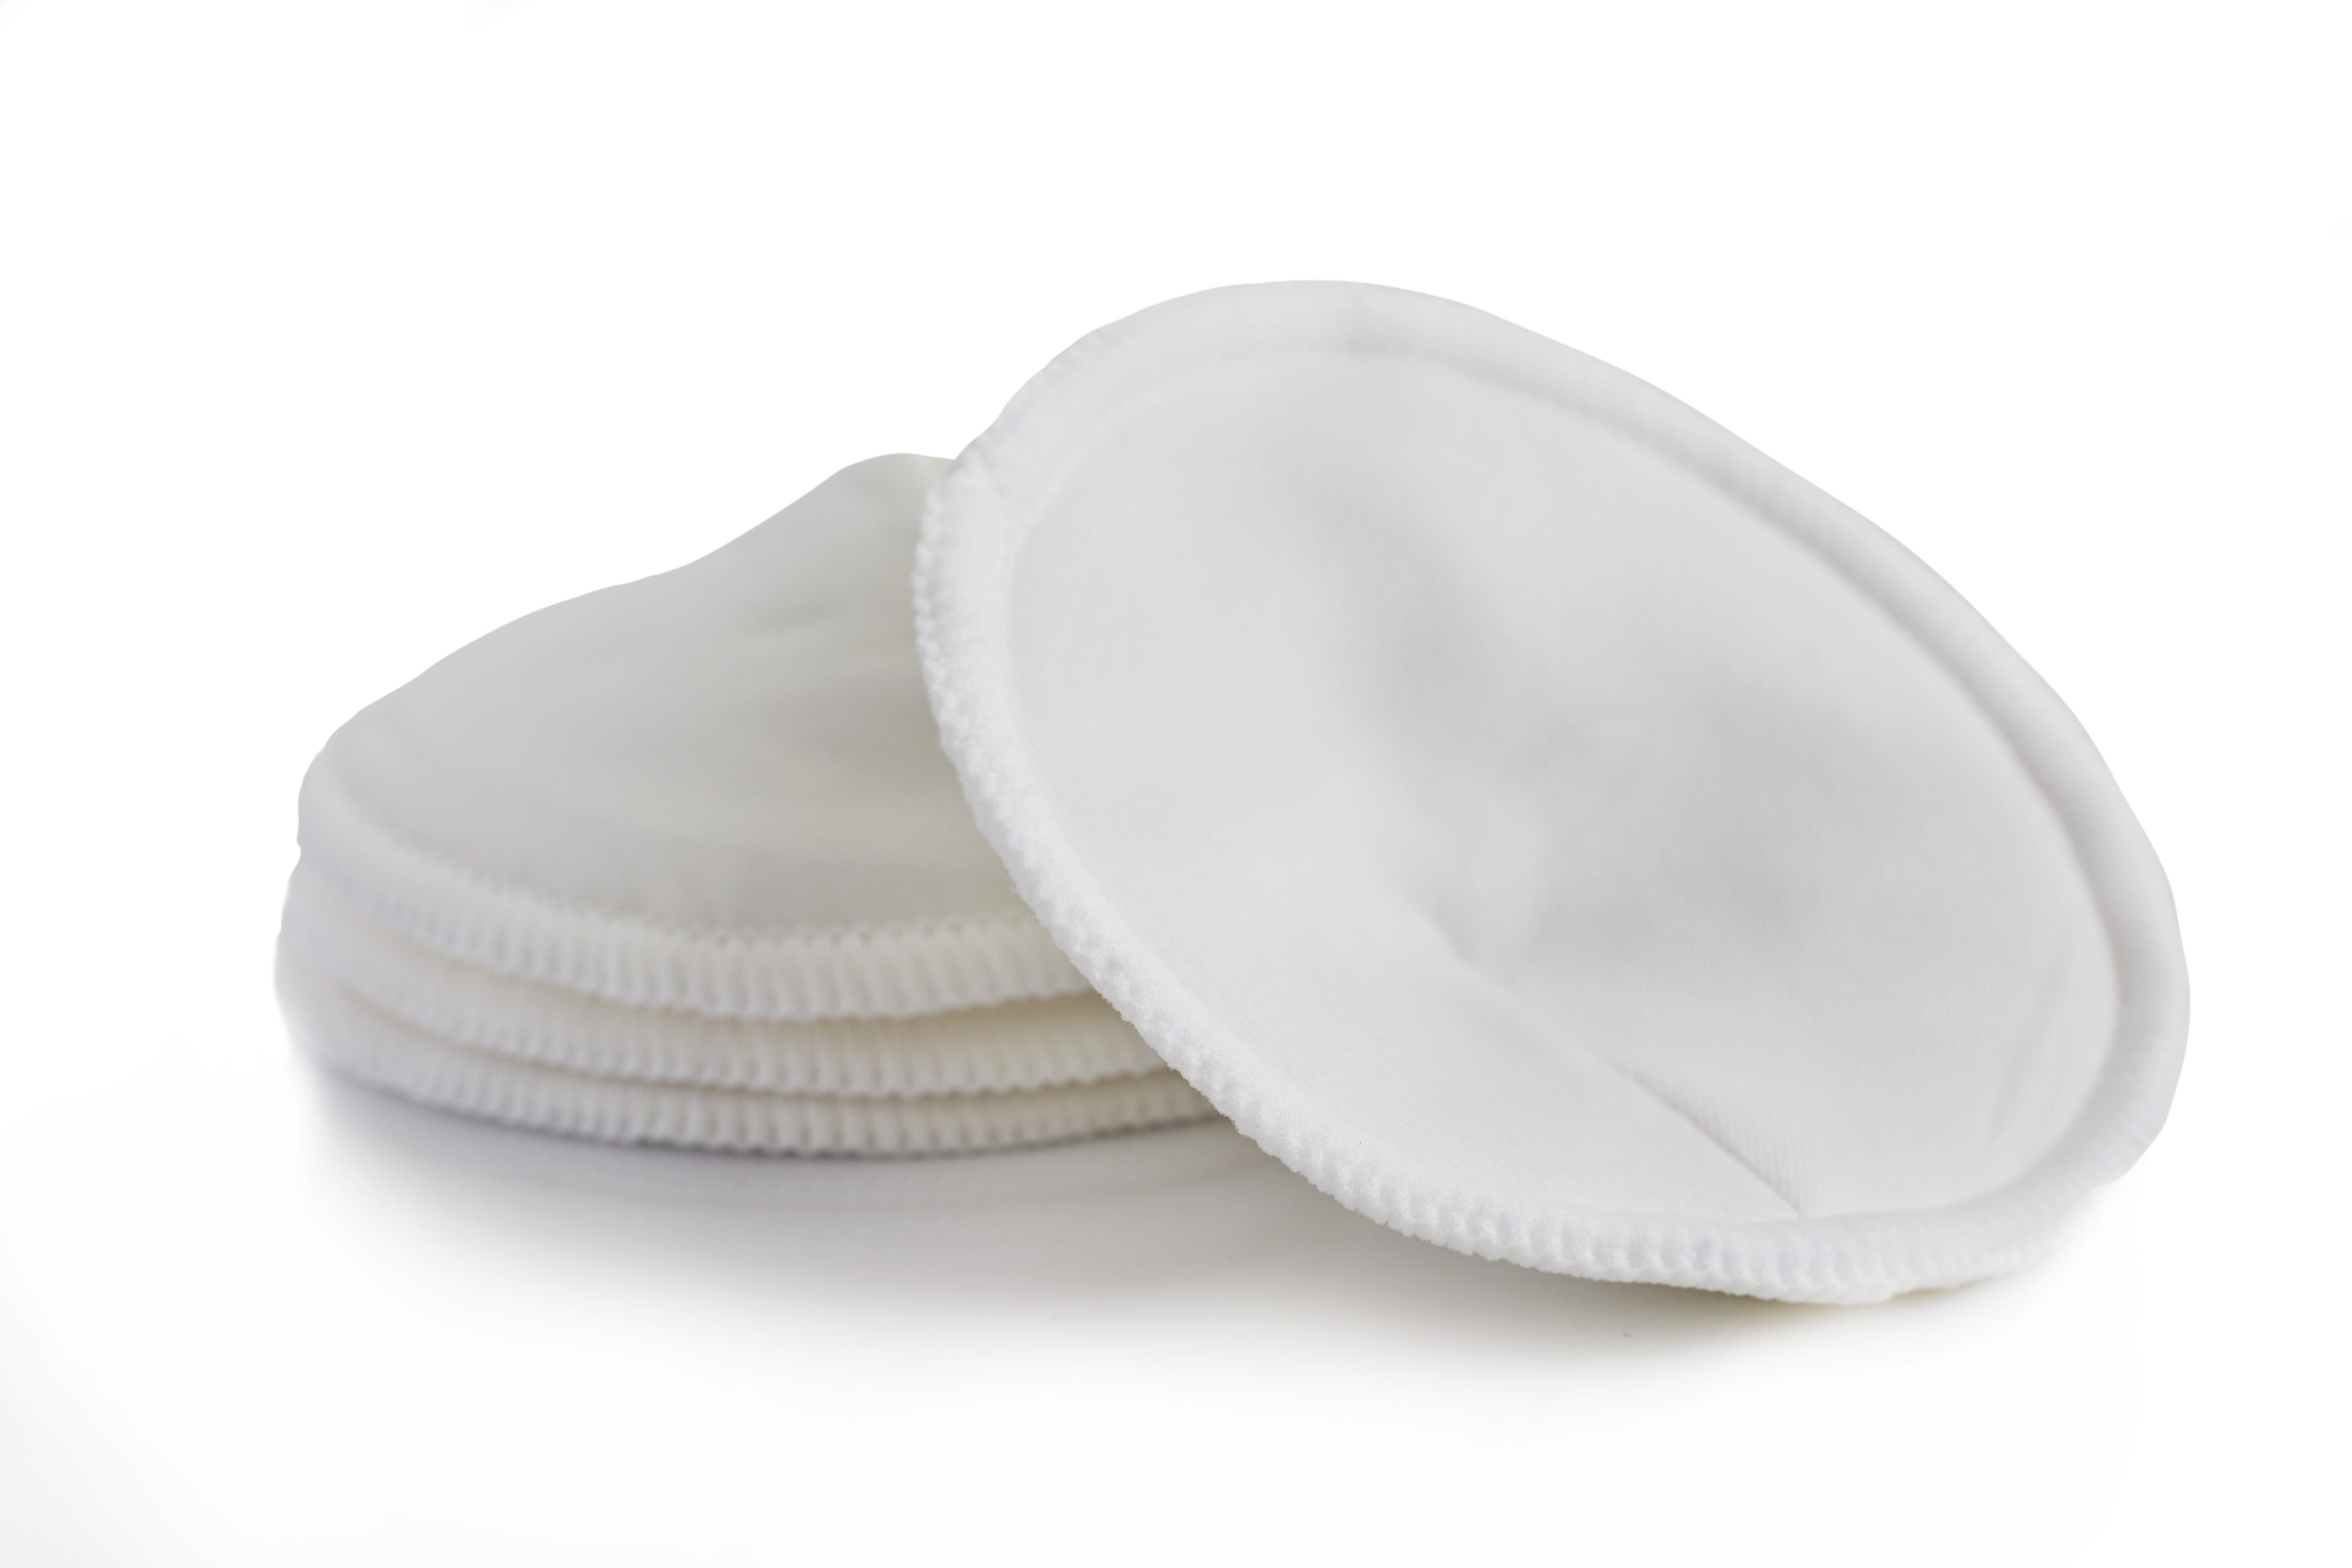 Pur Washable Breast Pads (4pcs) - (6502/9833)